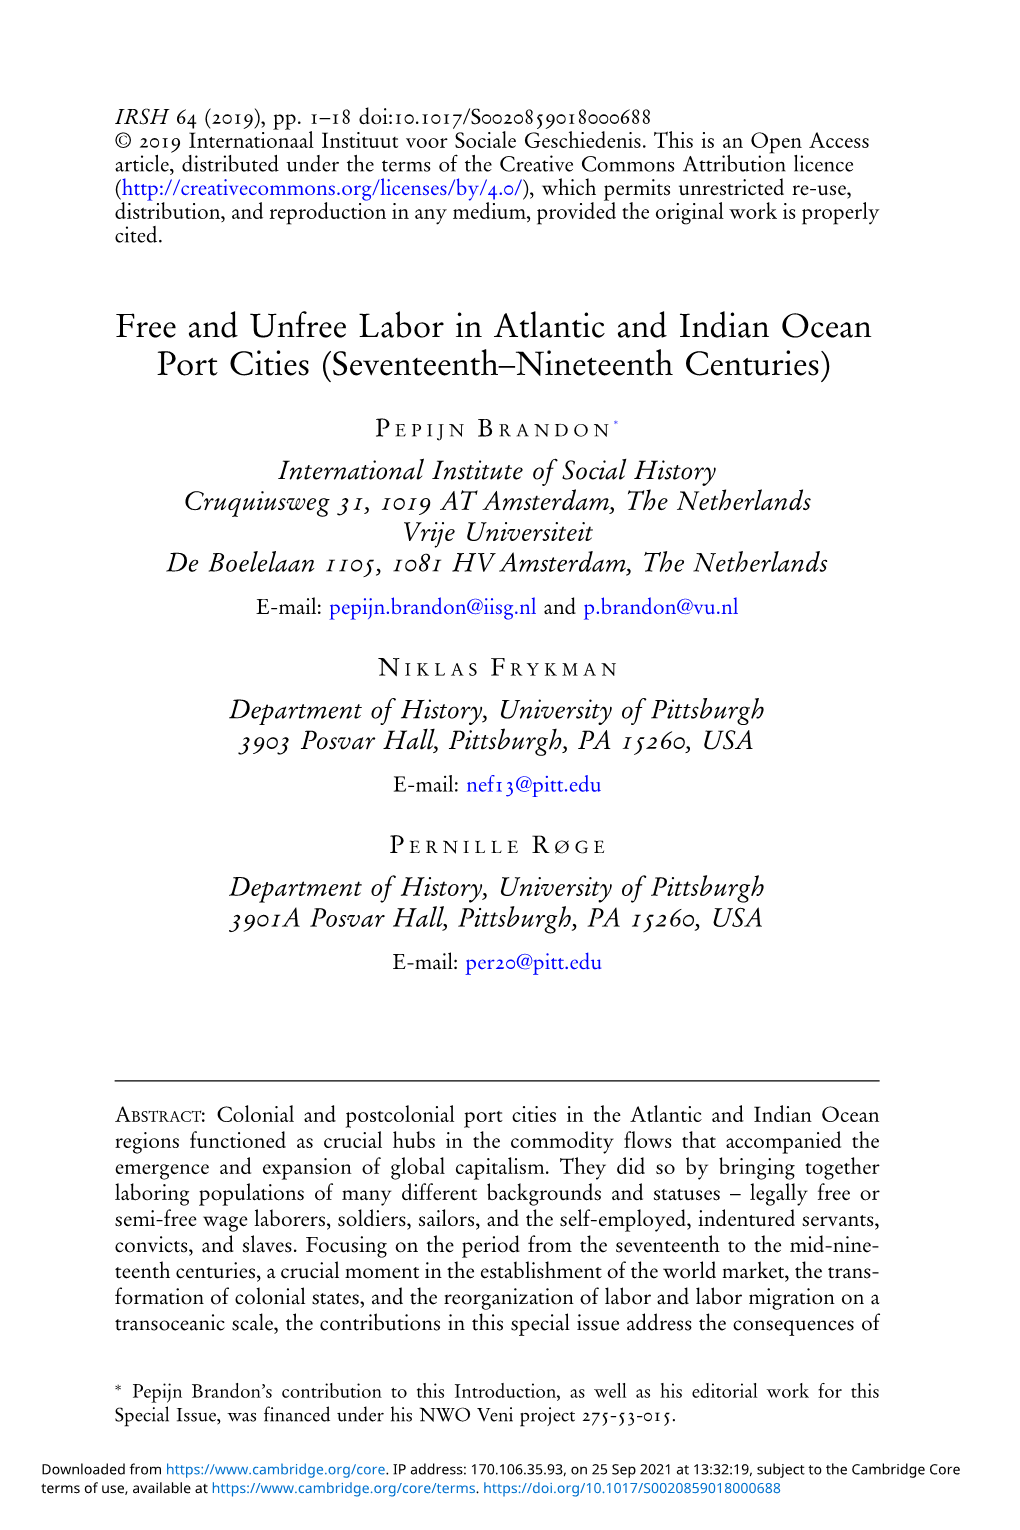 Free and Unfree Labor in Atlantic and Indian Ocean Port Cities (Seventeenth–Nineteenth Centuries)